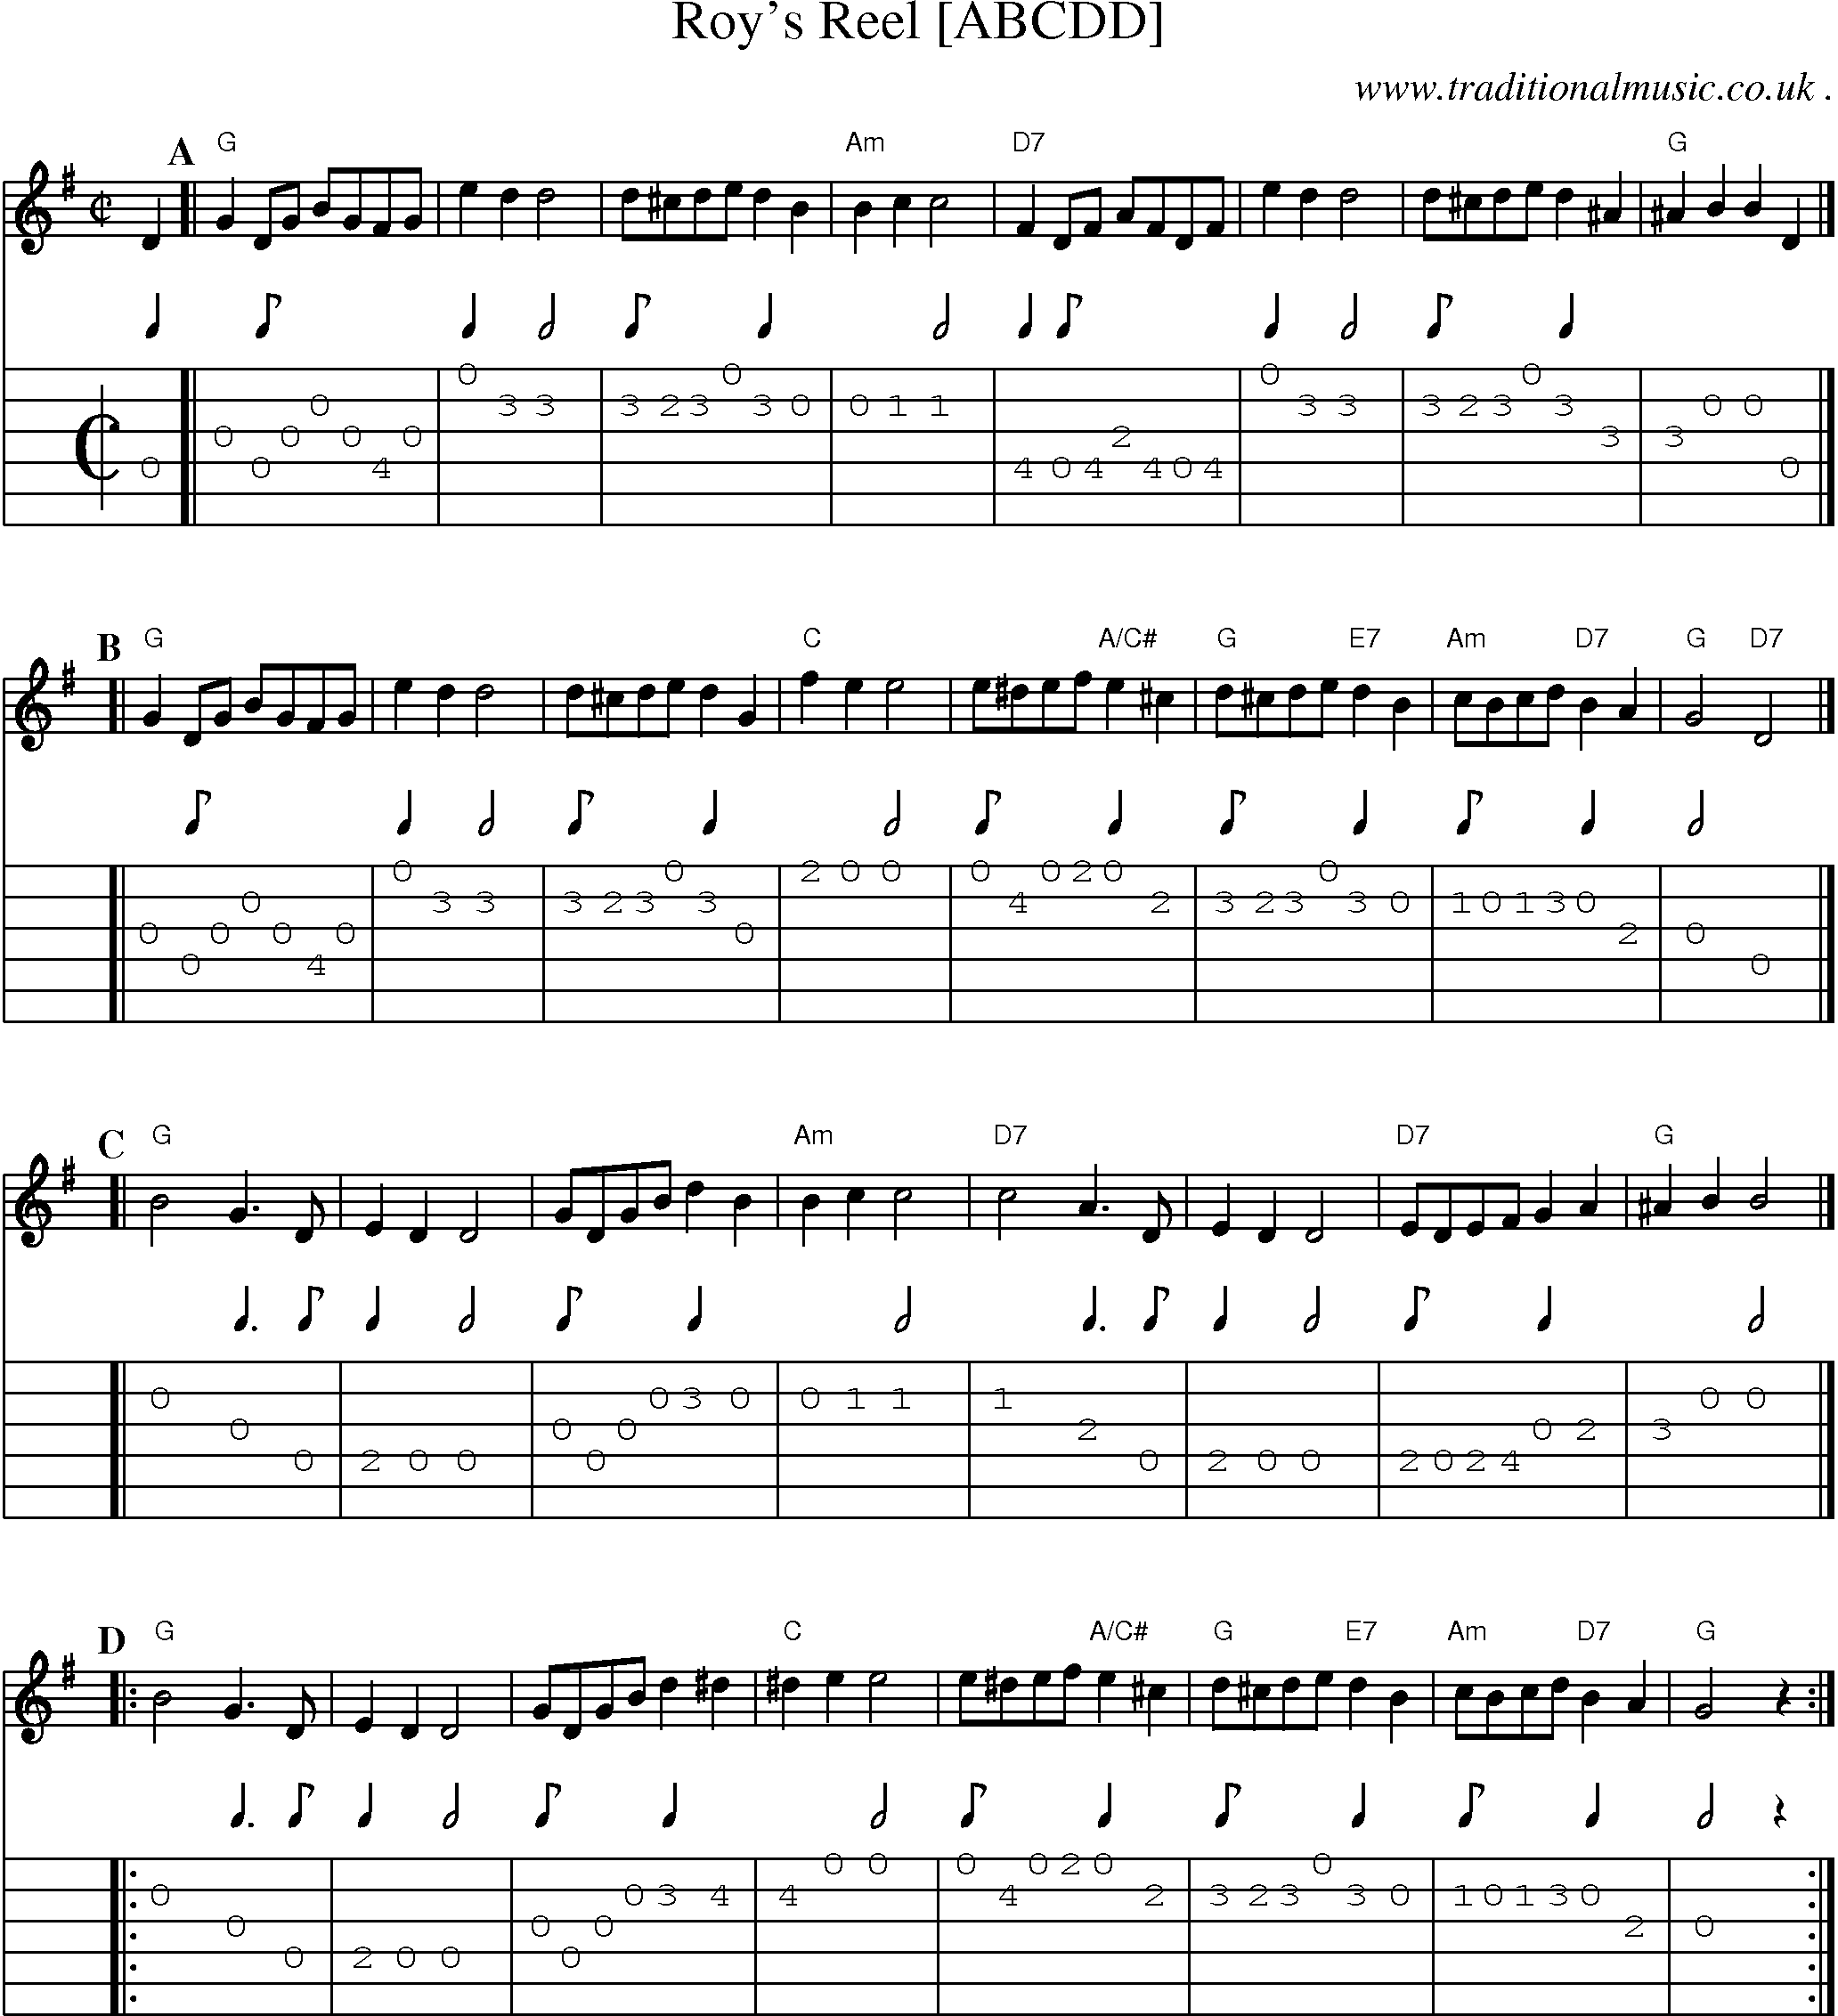 Sheet-music  score, Chords and Guitar Tabs for Roys Reel [abcdd]